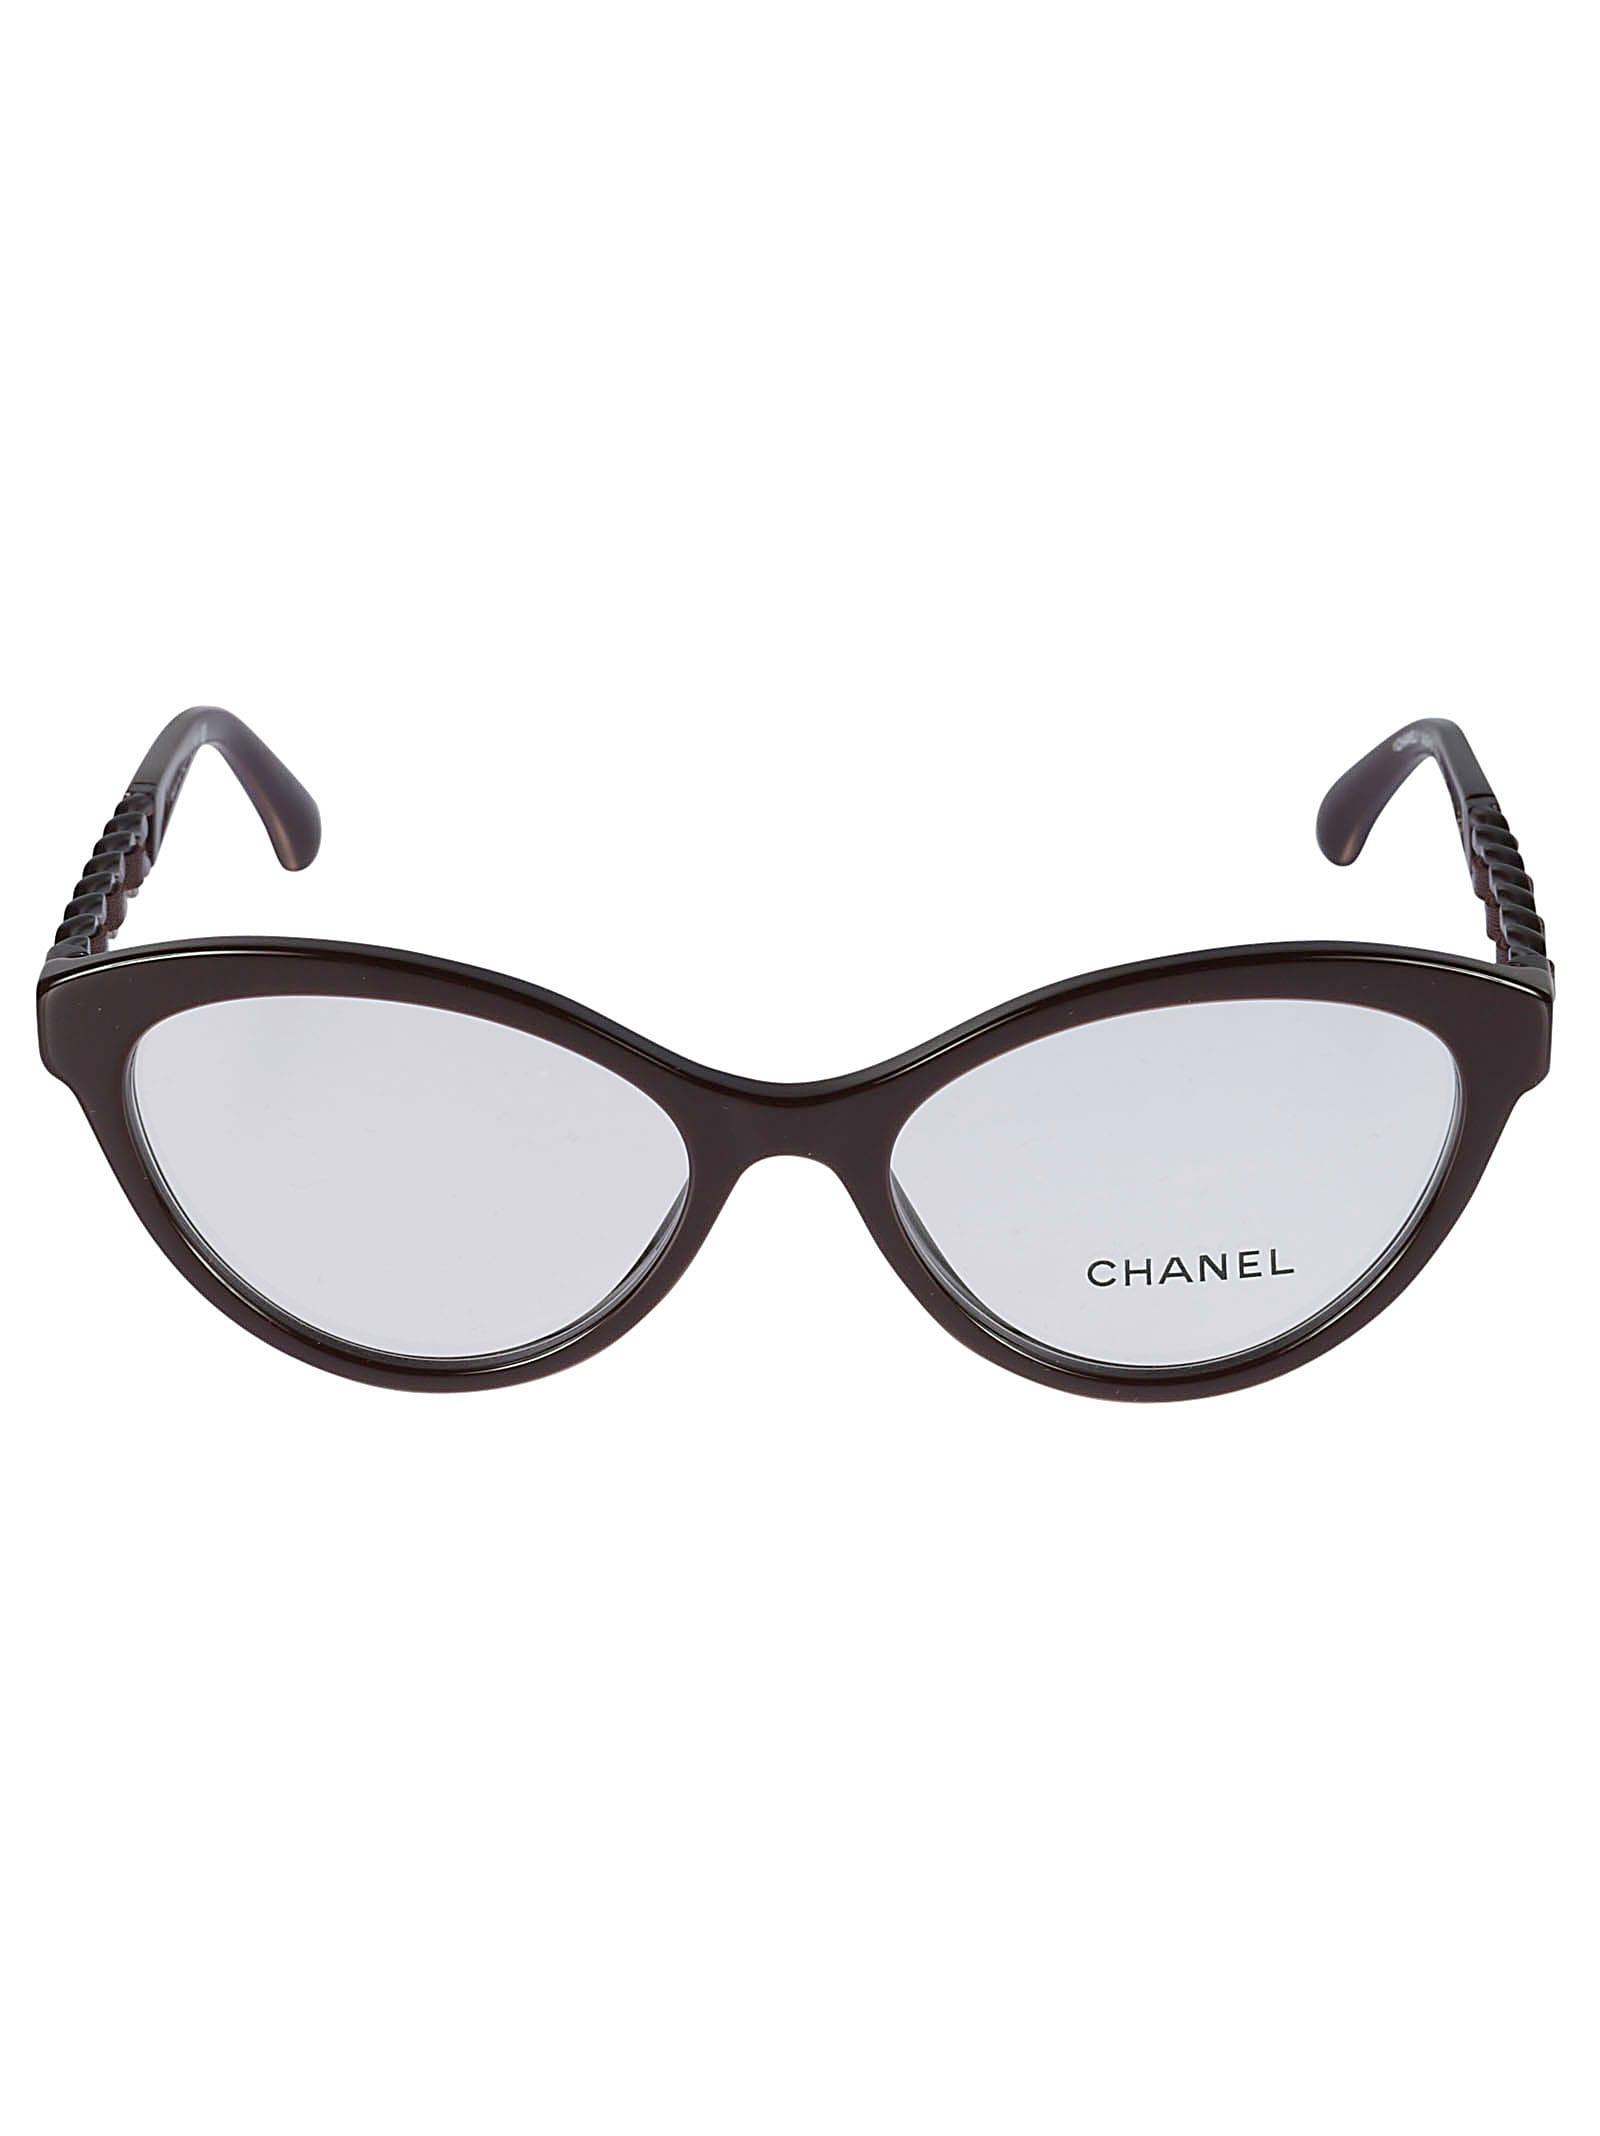 Chanel Coco Charms 3436 C622 Glasses - US